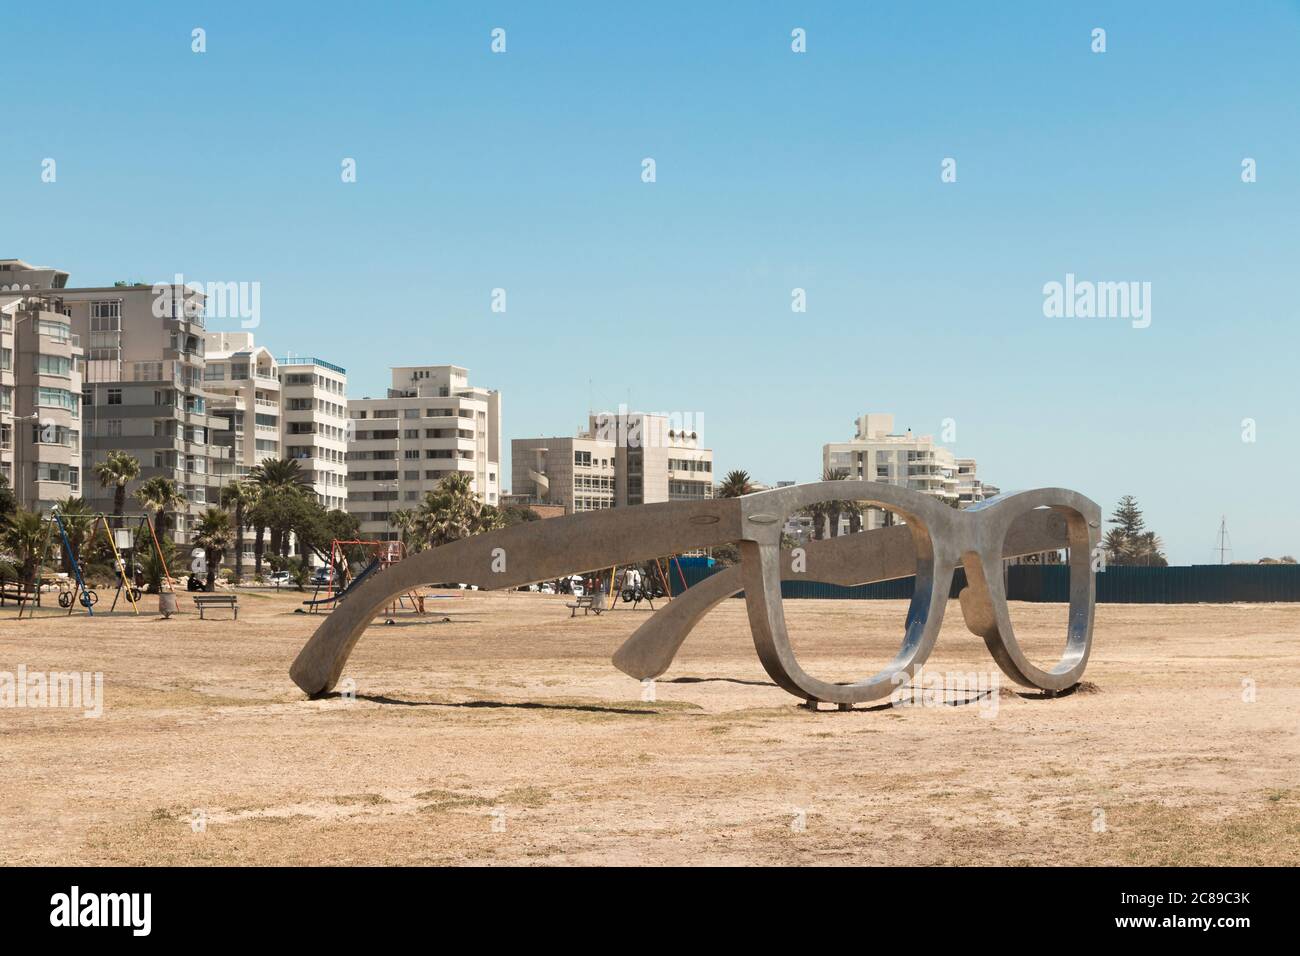 Huge glasses or sunglasses on the Sea Point beach promenade in South  Africa's Cape Town Stock Photo - Alamy